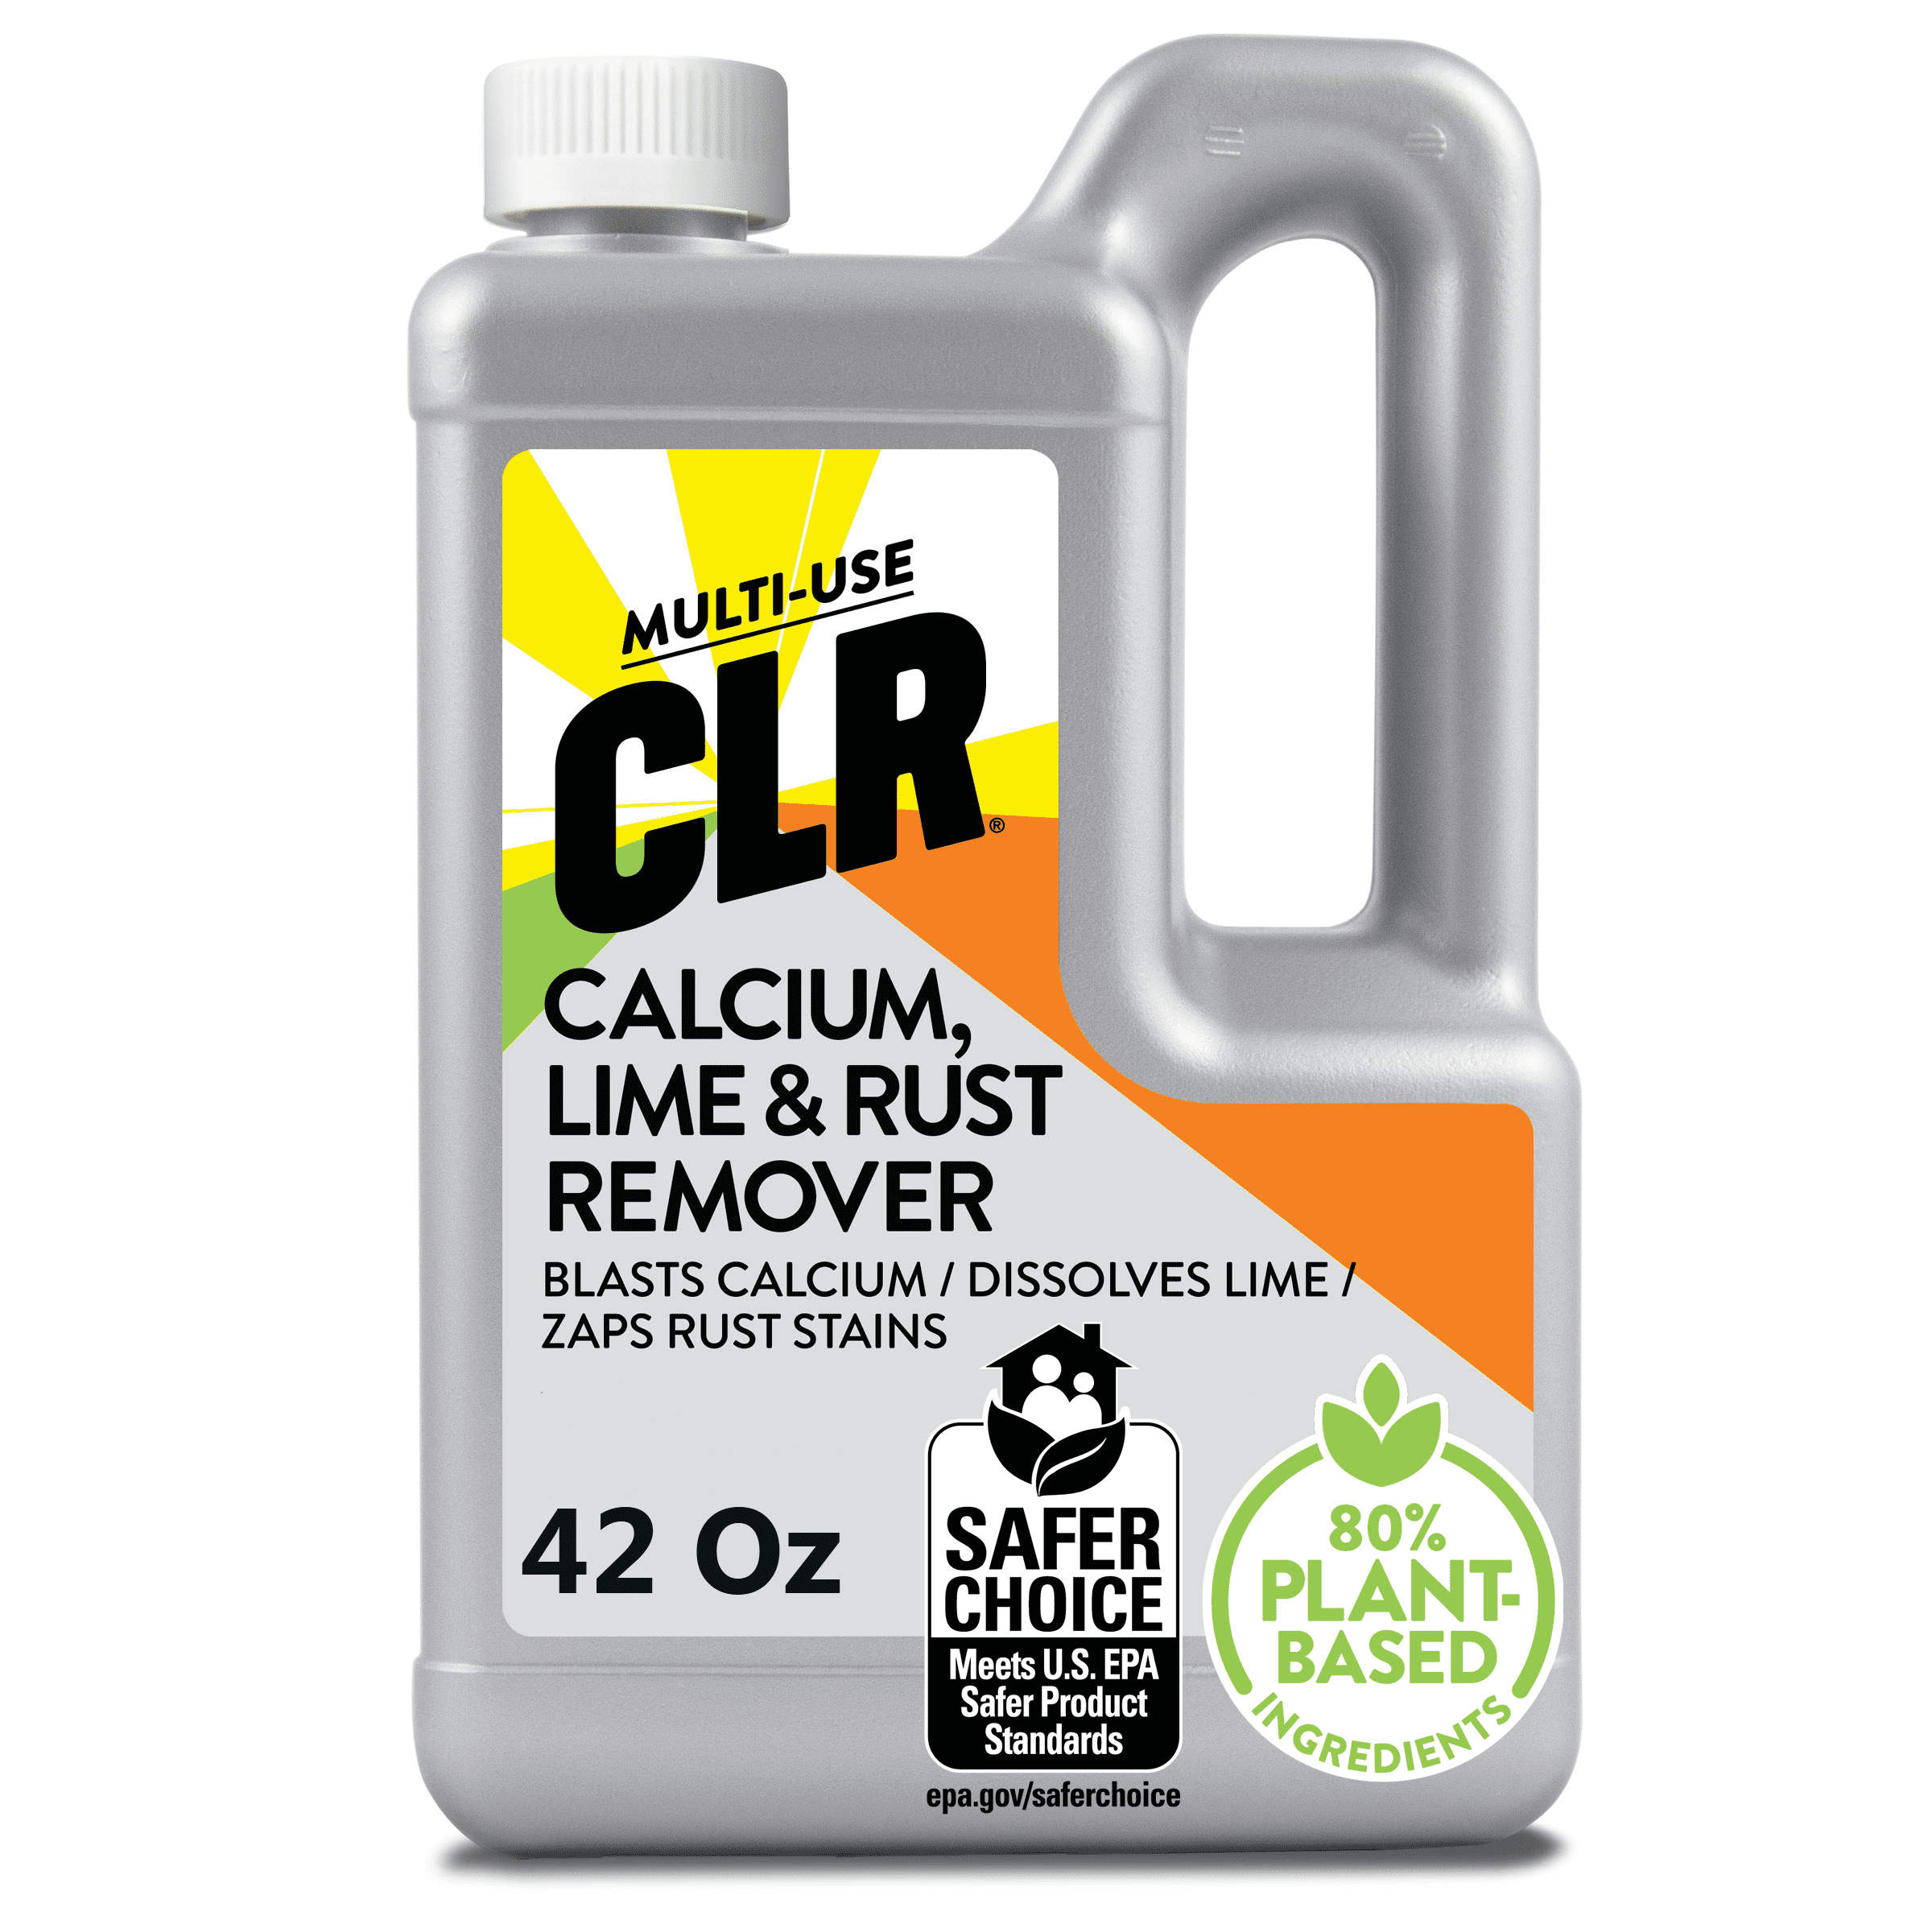 CLR Calcium Lime and Rust Remover, Multi-Use Household Cleaner, 42 Fluid Ounce